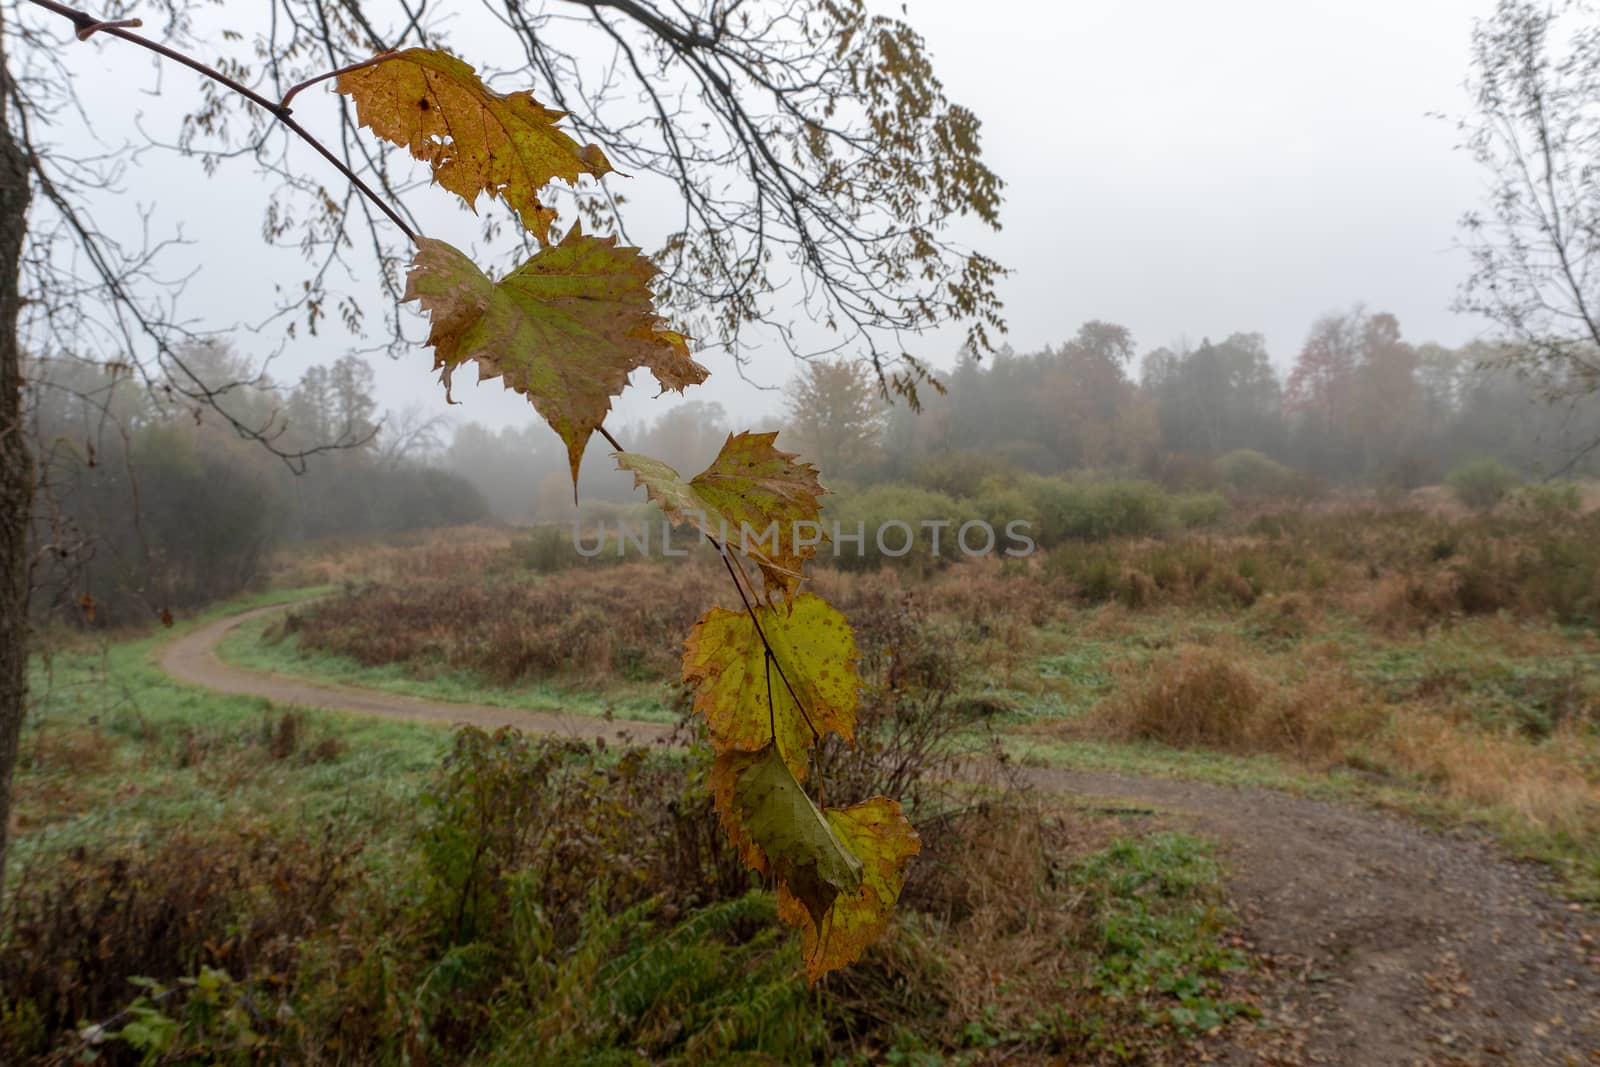 Misty autumn morning in the forest is unsteady and damp and not a soul